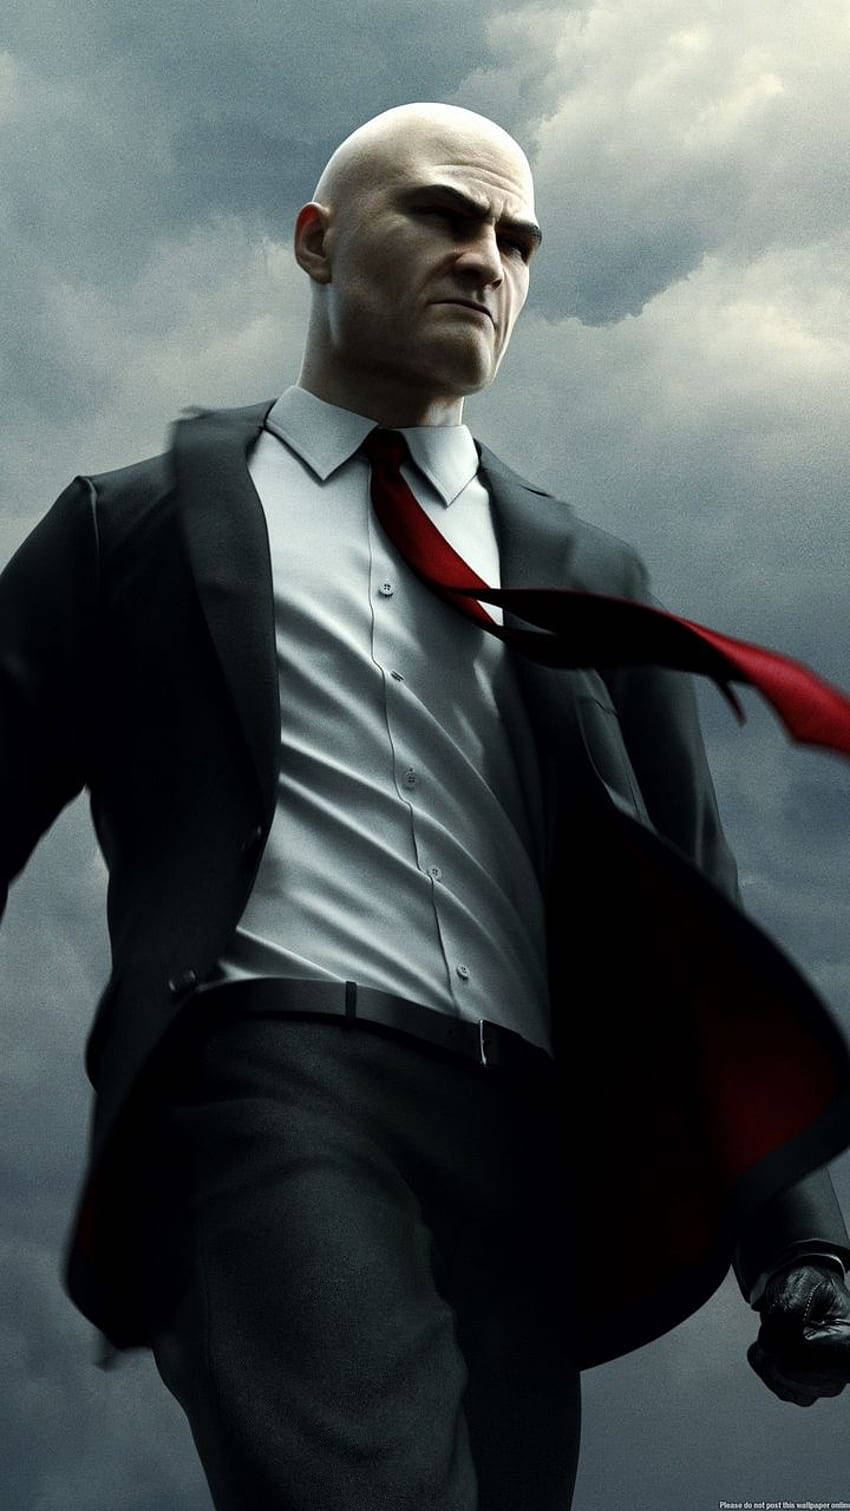 Check Out the Hitman Phone - The Ultimate in Security and Technology Wallpaper